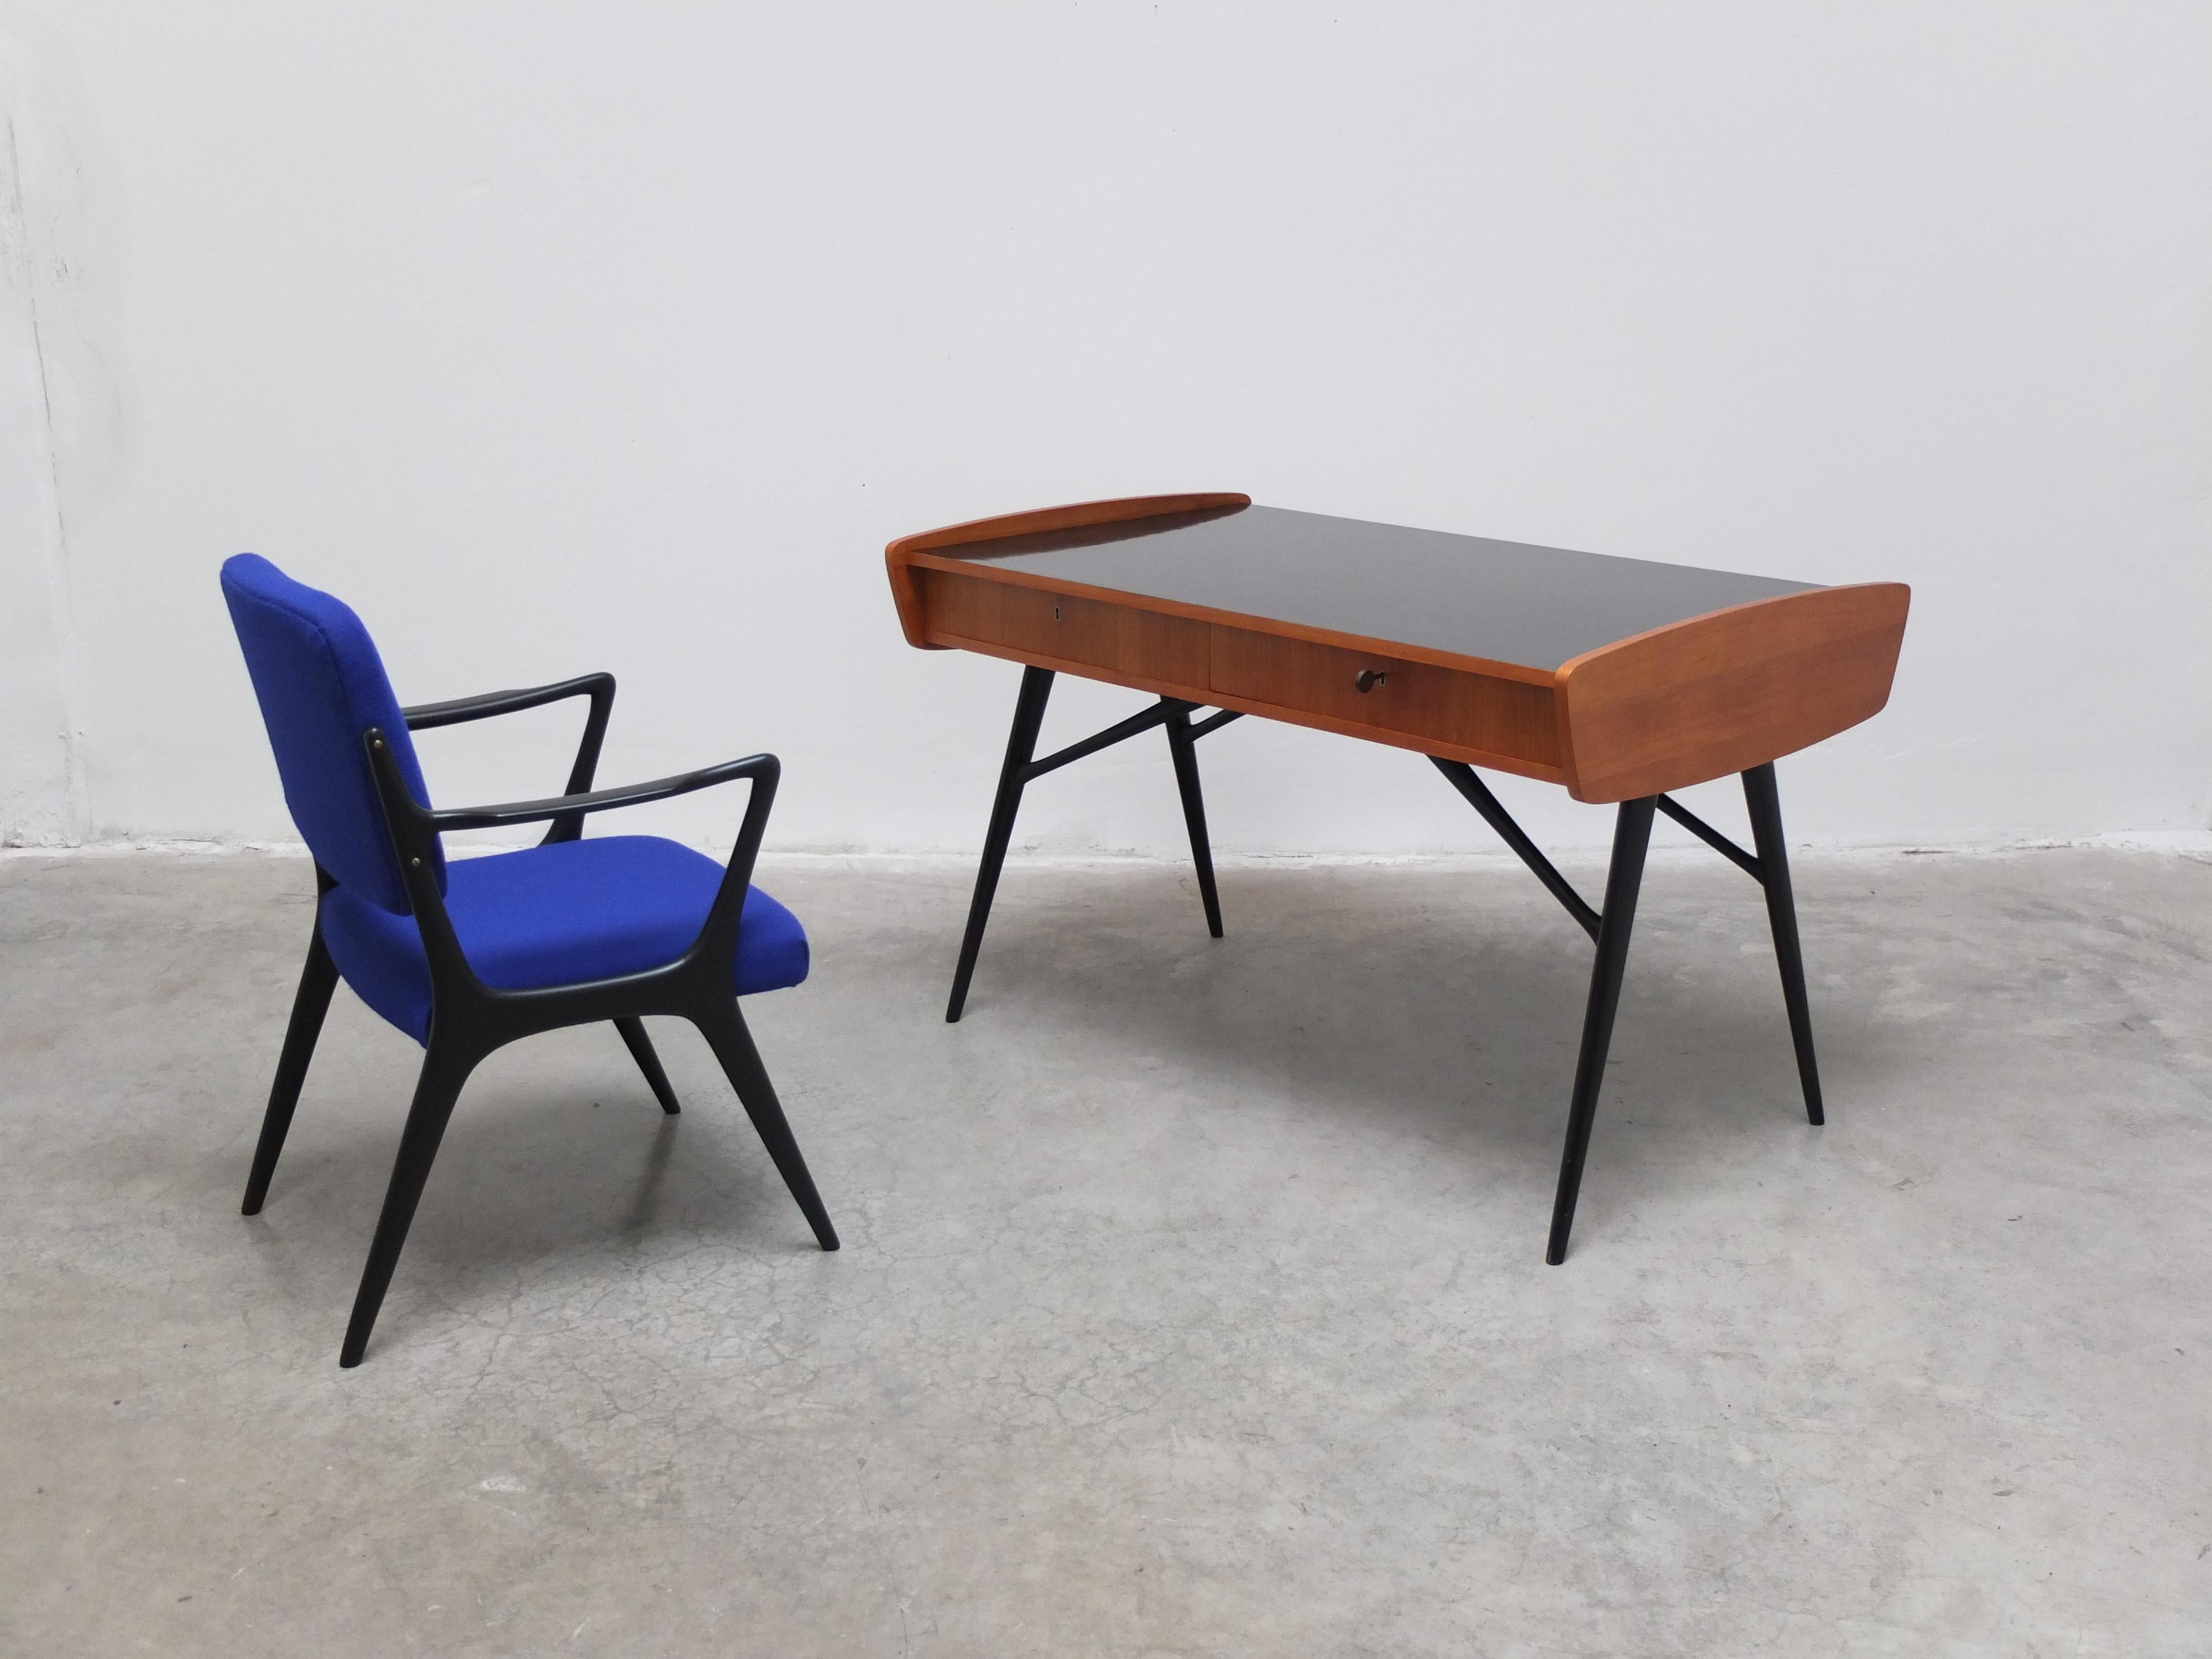 Beautiful ‘Model 305’ desk with matching ‘S5’ chair designed by Alfred Hendrickx for Belform. Both the desk and the chair are from Alfred’s early design period in the 50s where he was clearly inspired by Italian and Scandinavian designers. Both